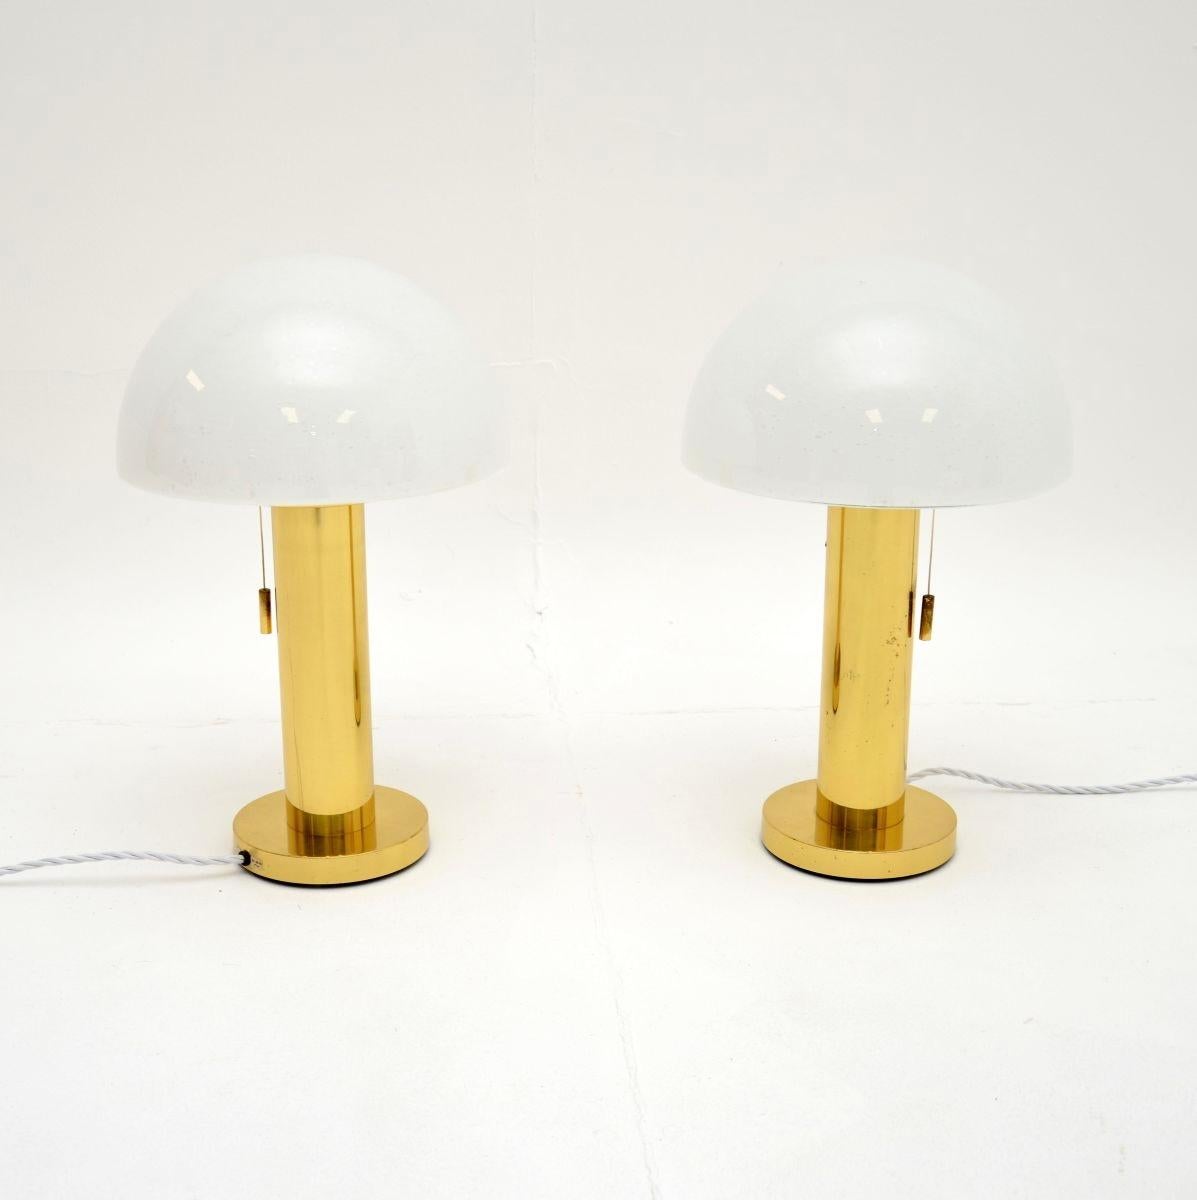 A stunning pair of vintage Italian brass and glass table lamps, dating from the 1970’s.

They are of exceptional quality, the brass stands are beautifully made and support wonderful white opaque shades. They are a lovely size and look absolutely